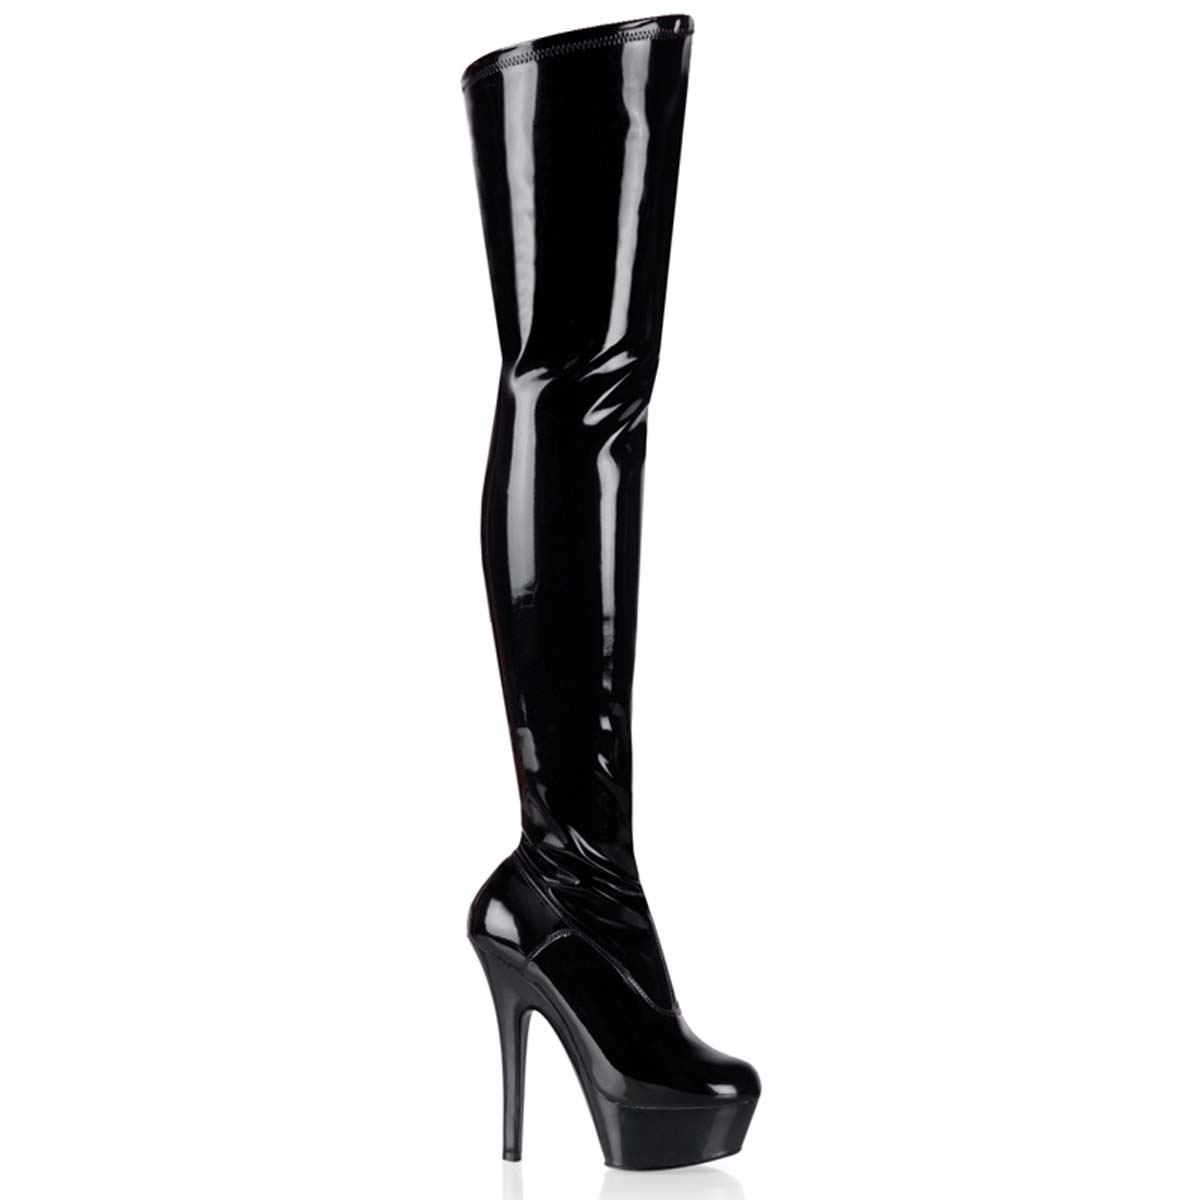 Pleaser Kiss 3000 Black Stretch Patent Black In Sexy Boots 89 95